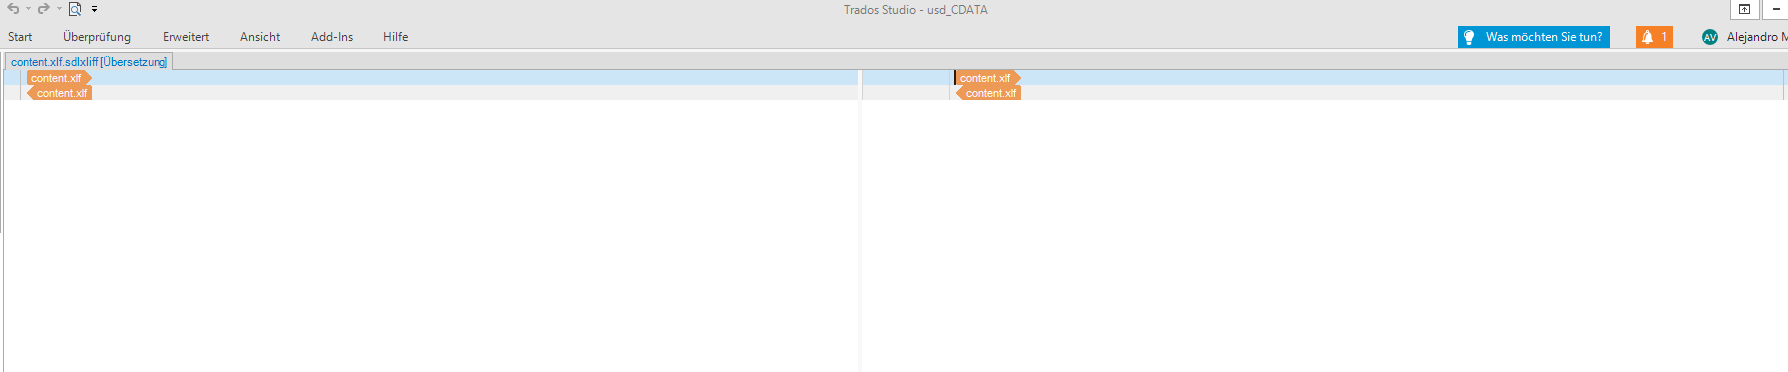 Trados Studio editor window showing two tabs with 'content.xlf' files open, no visible text or error messages in the editing area.